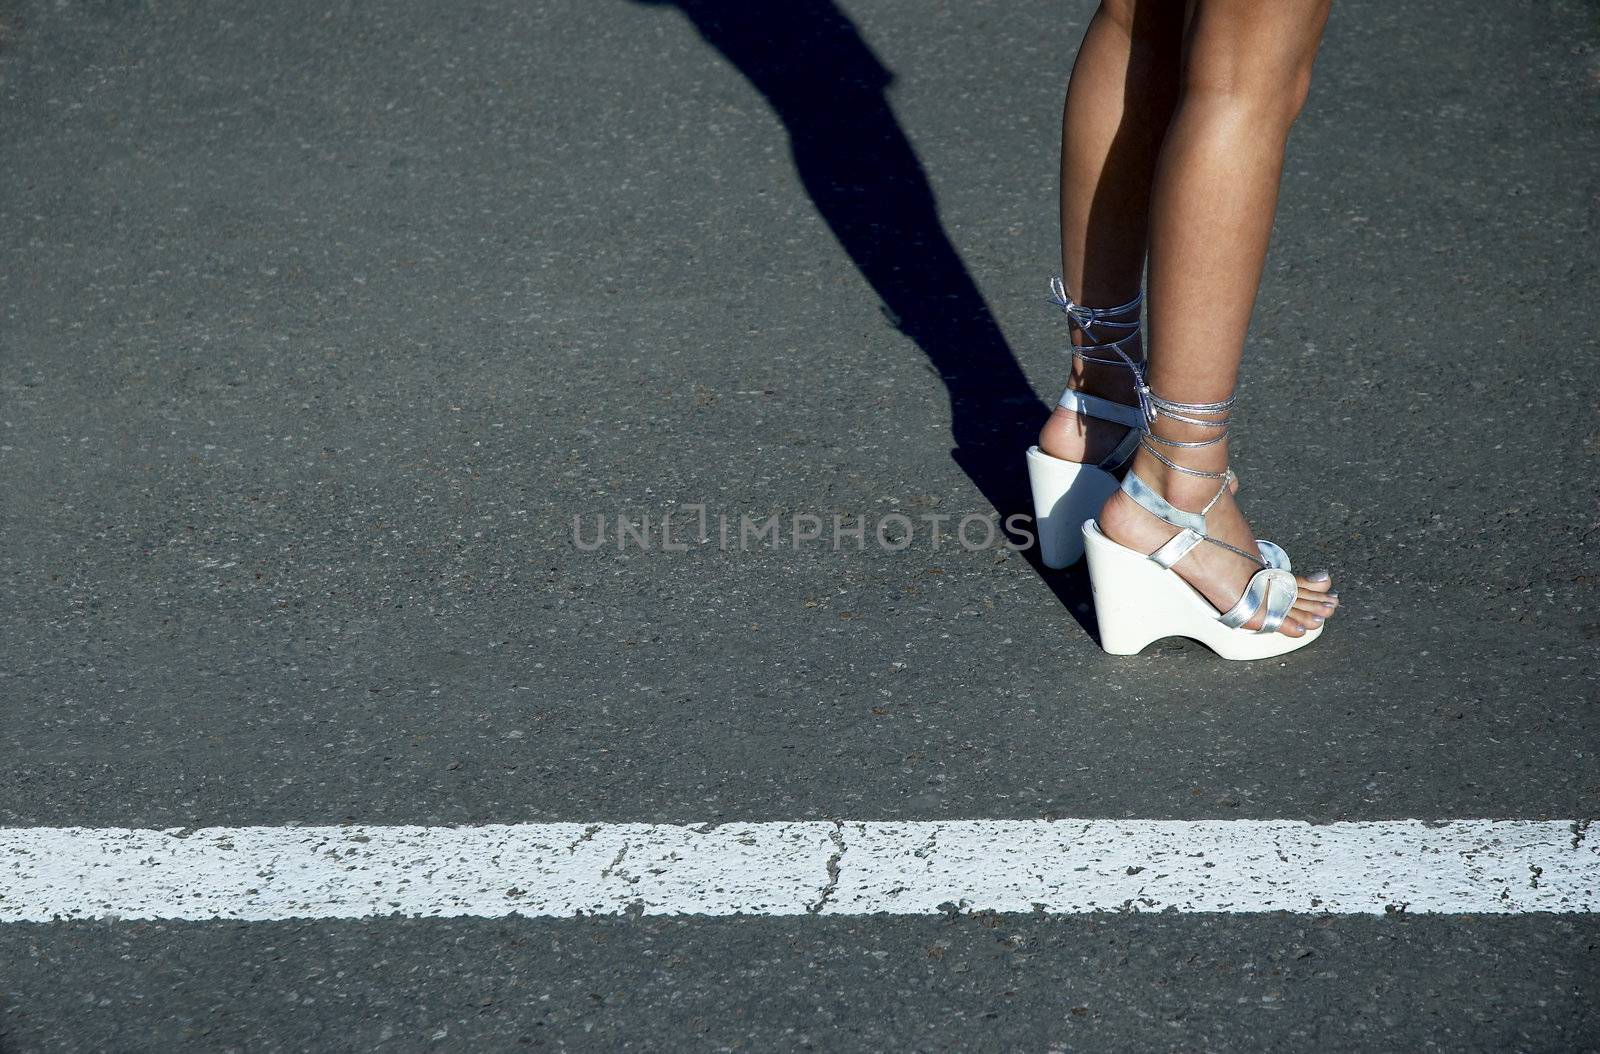 Sexy legs in sandals by Kuzma